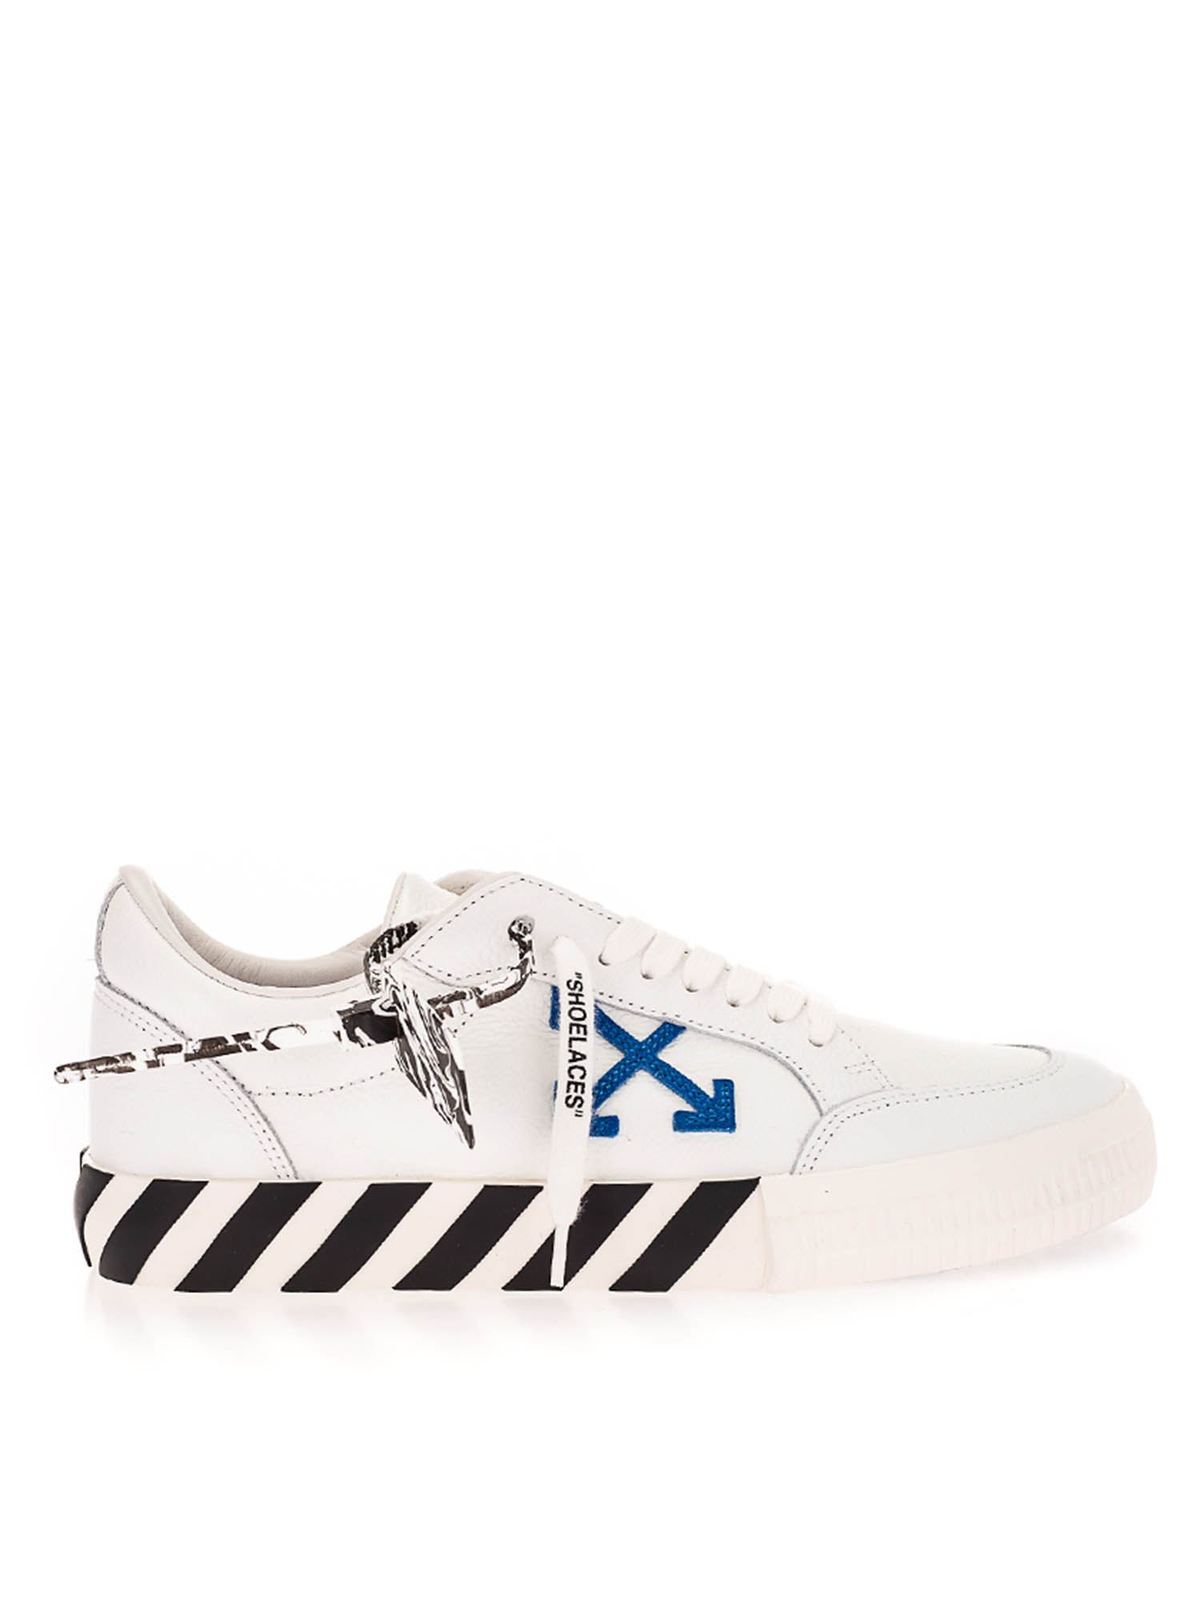 low vulcanized sneakers off white Big sale - OFF 73%